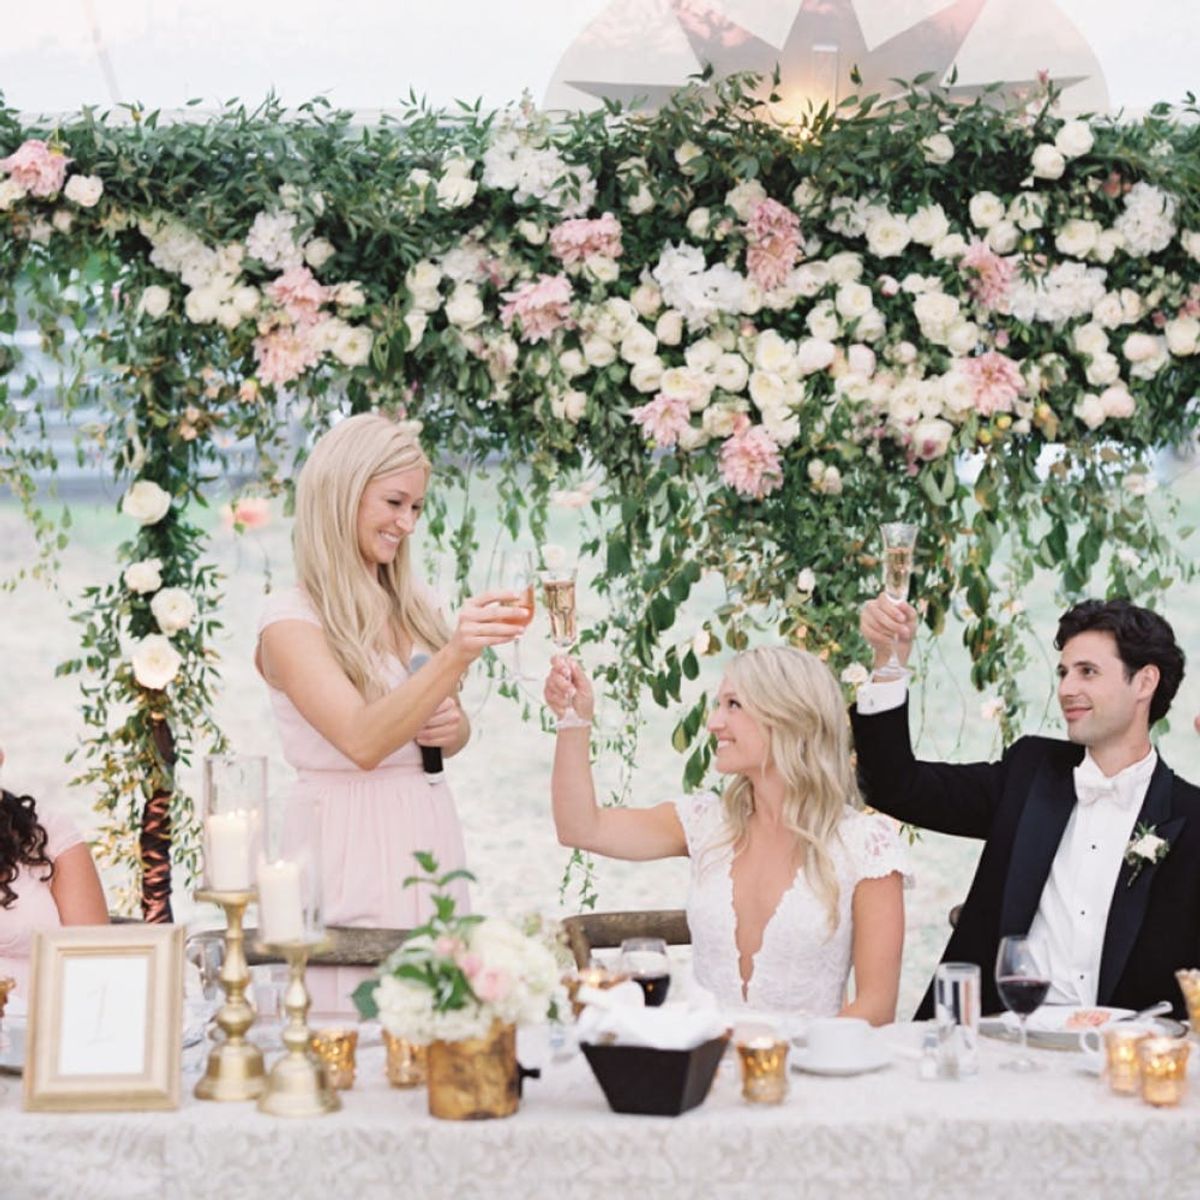 How to Give the Perfect Wedding Toast for Your Bestie’s Big Day